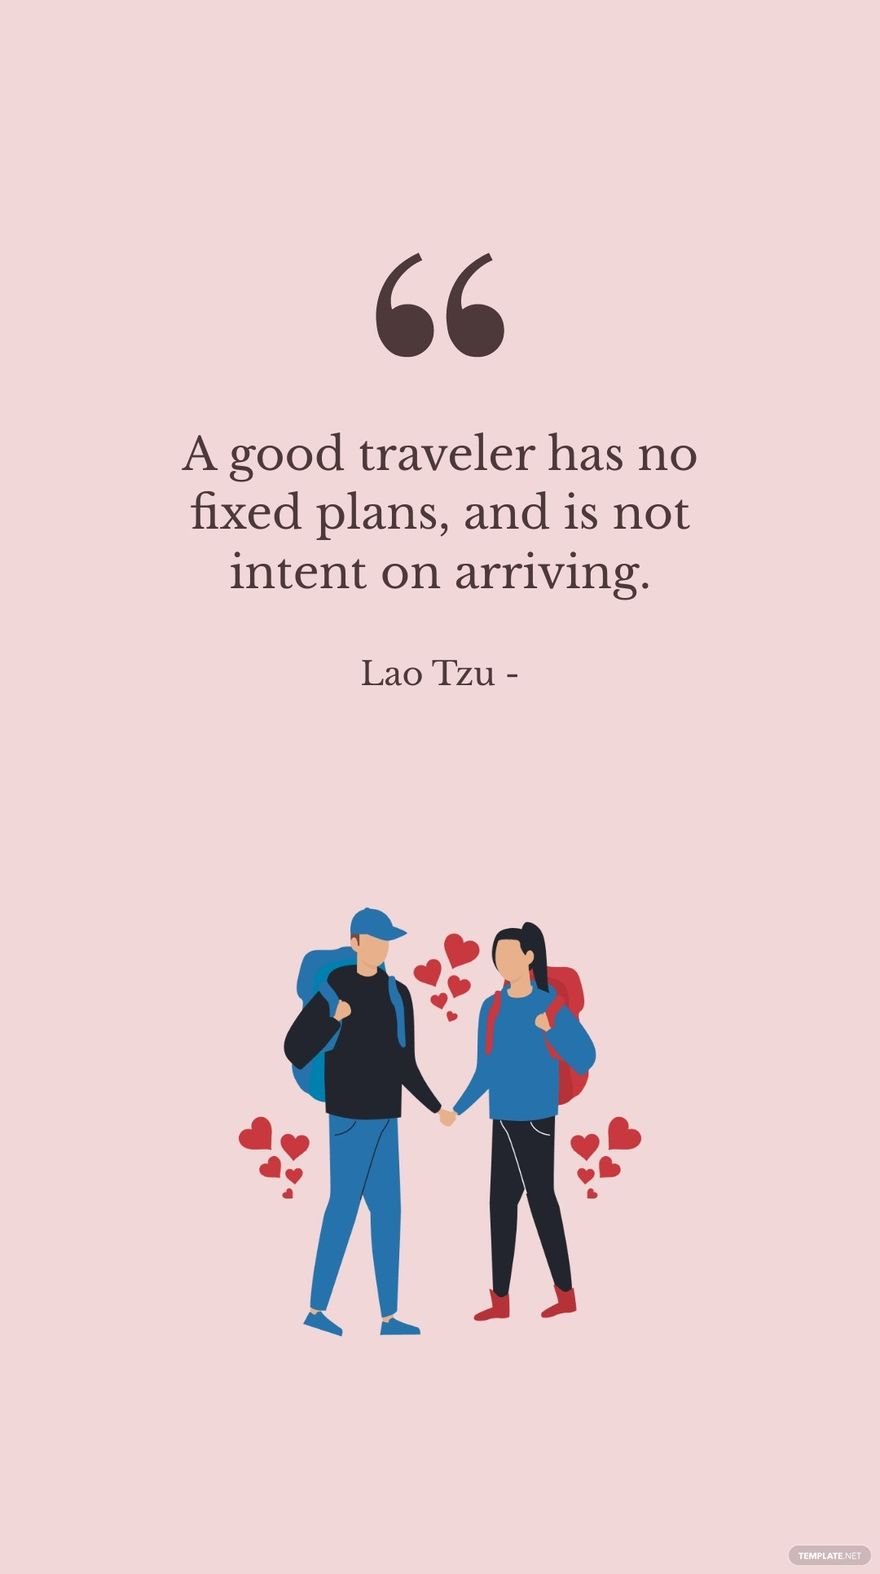 Lao Tzu - A good traveler has no fixed plans, and is not intent on arriving.